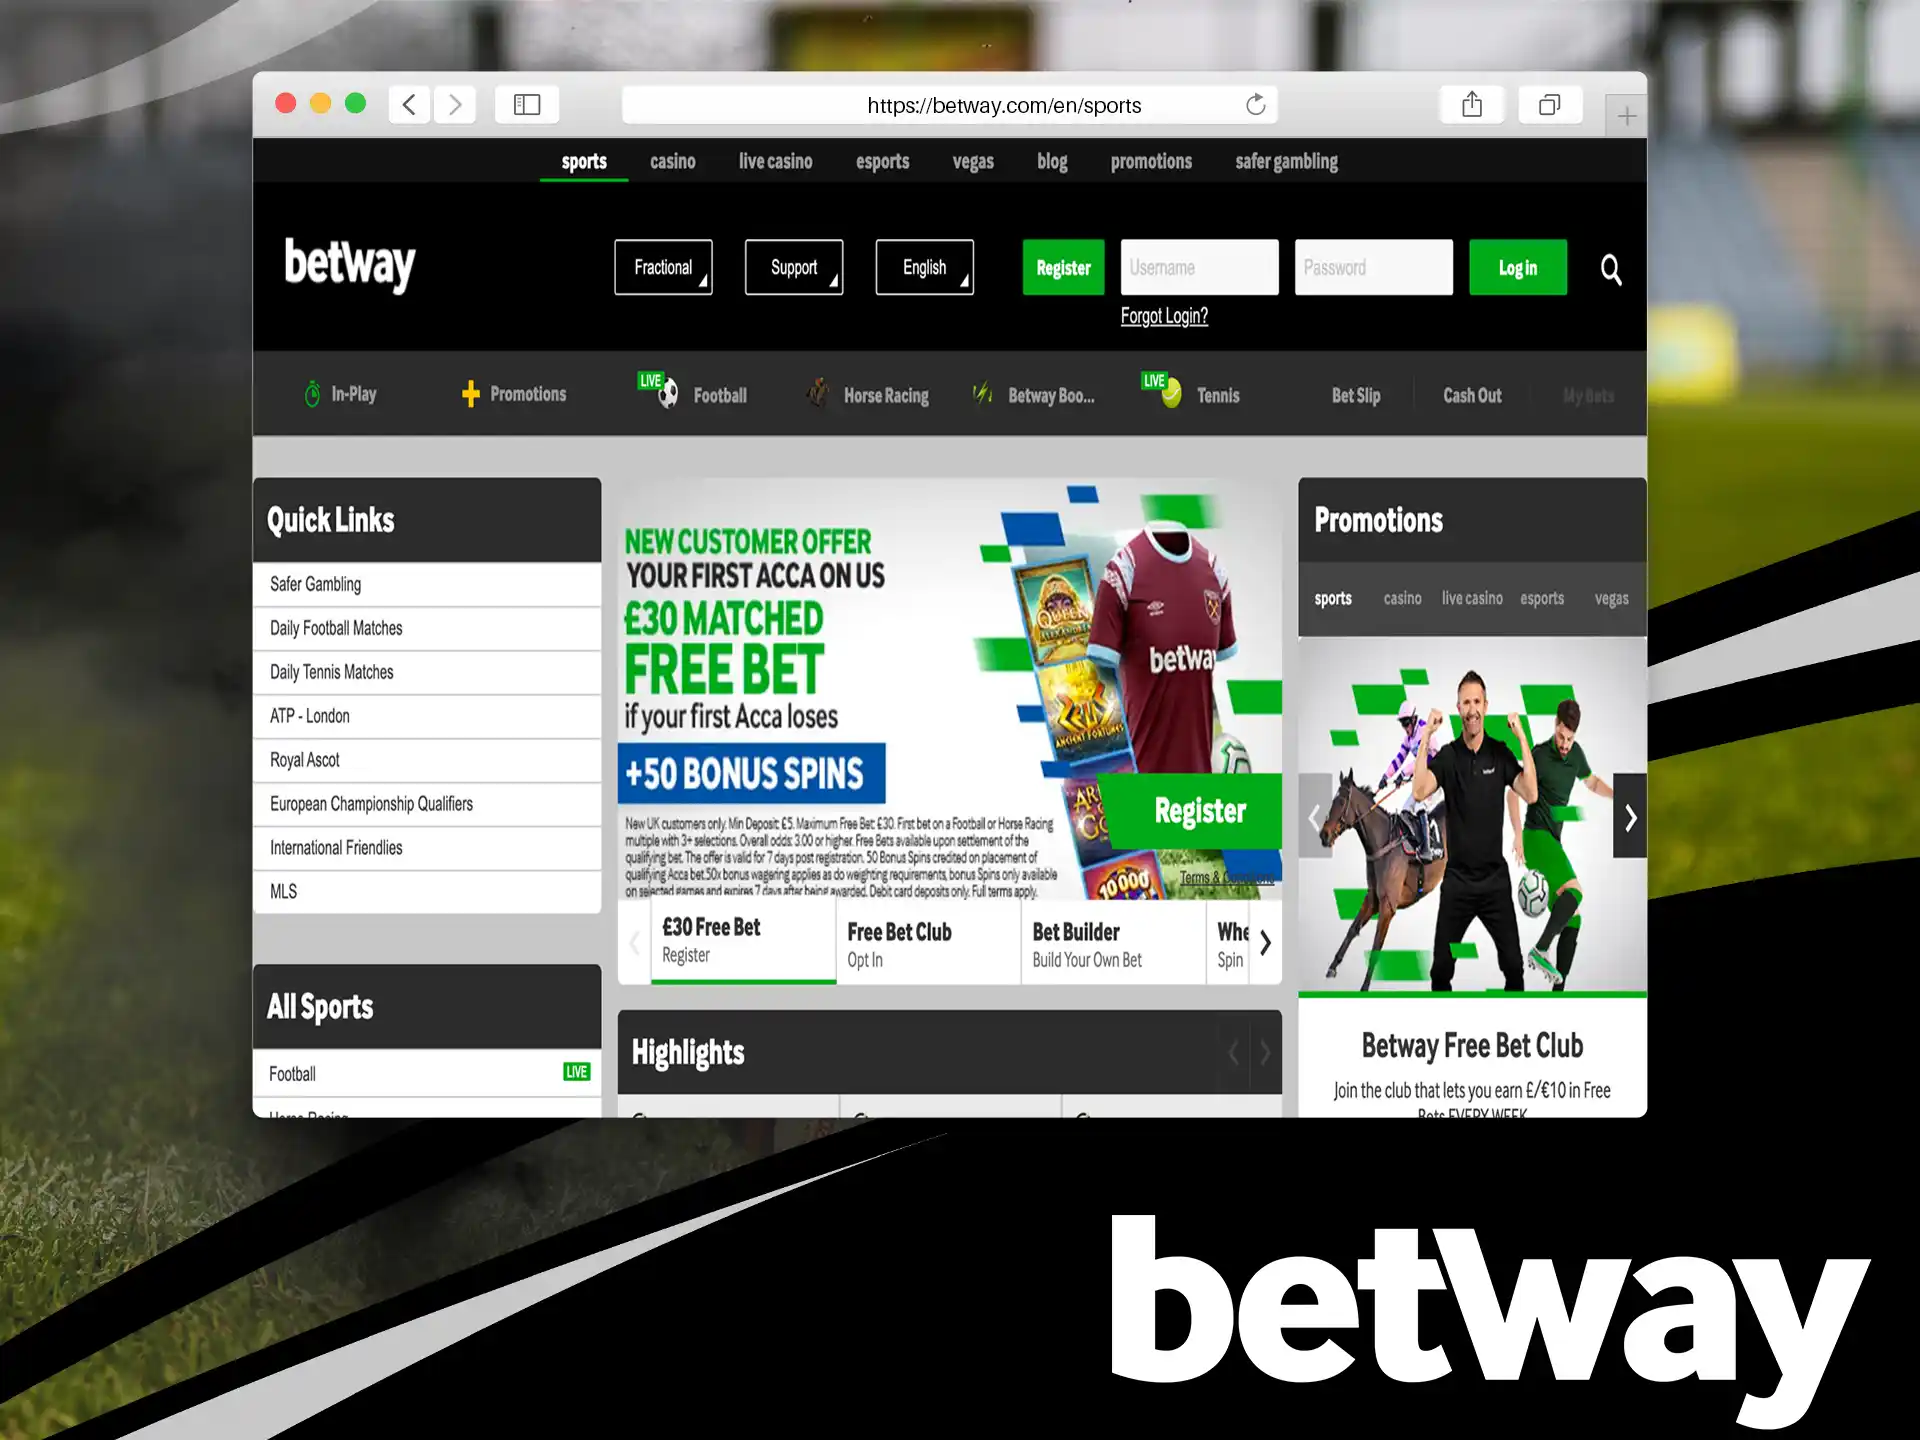 You can make a fortune wagering on India's most popular betting site, just log into your Betway account.